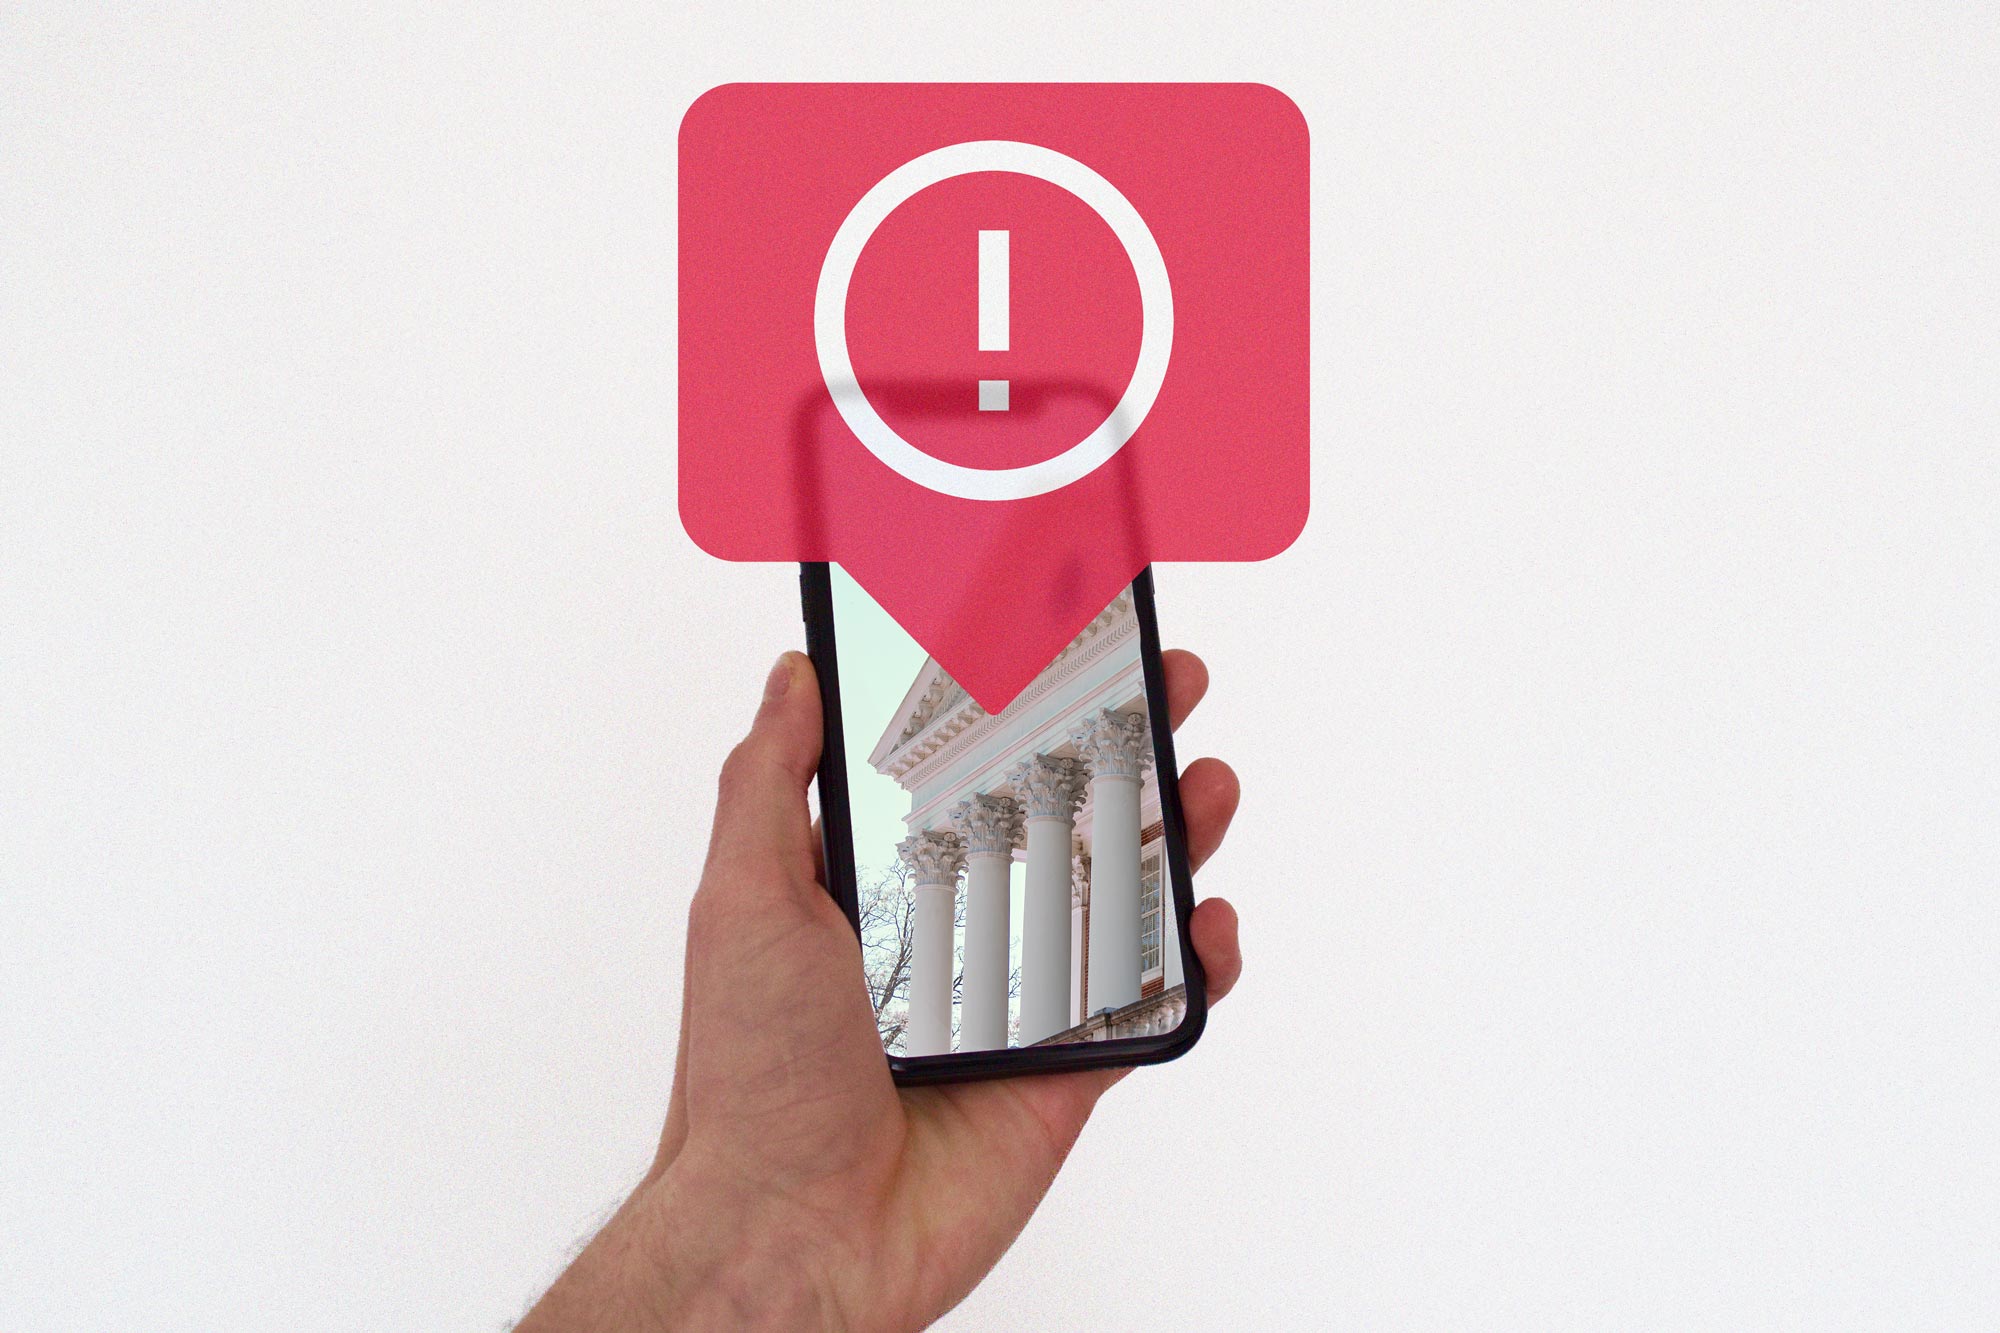 Hand holding phone with a graphic of an alert icon overlayed on the phone